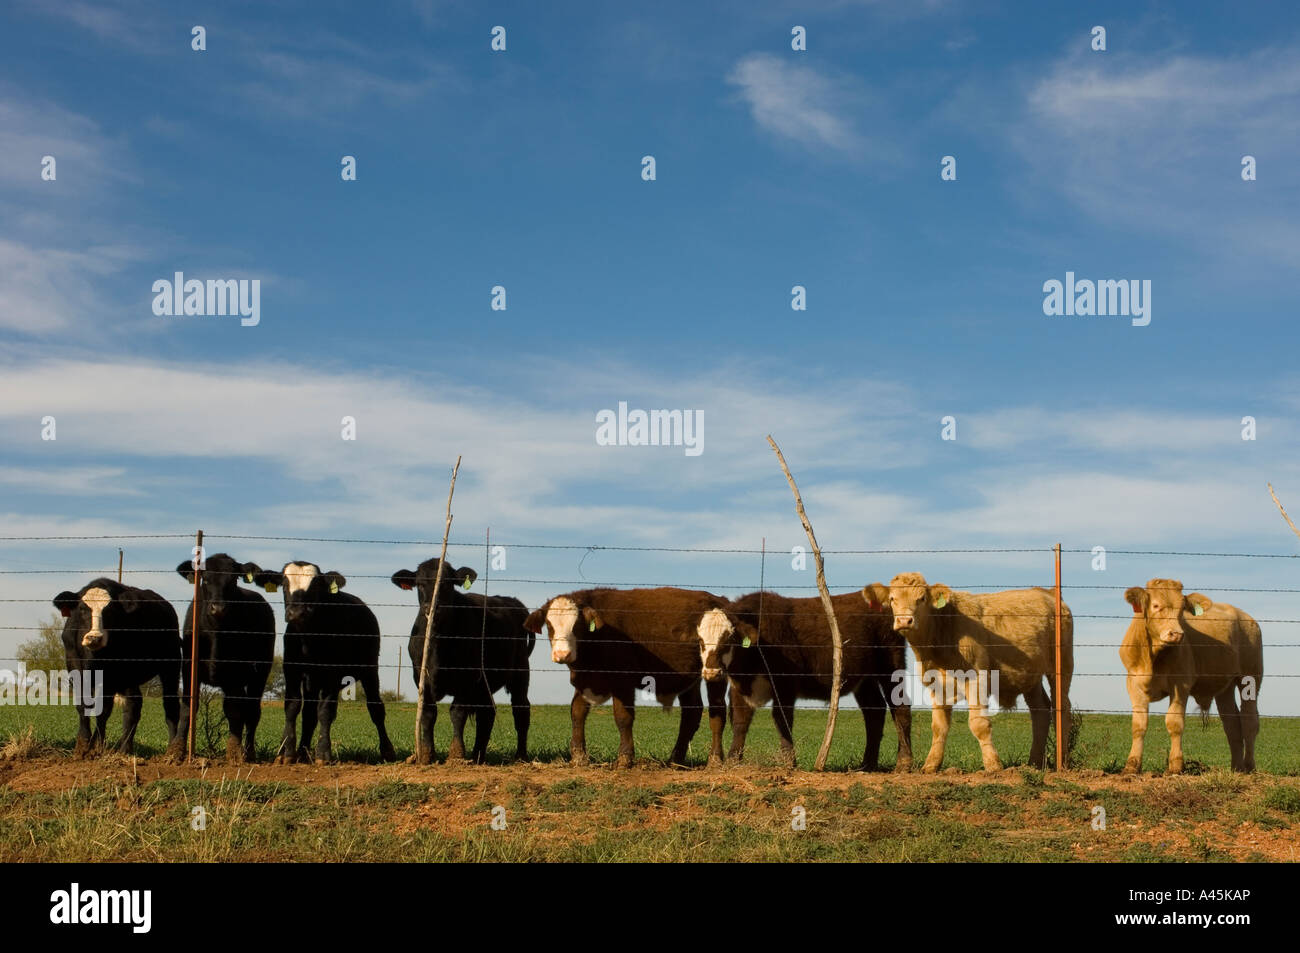 COWS LINE UP BEHIND A BARBED WIRE FENCE ON A TEXAS RANCH Stock Photo